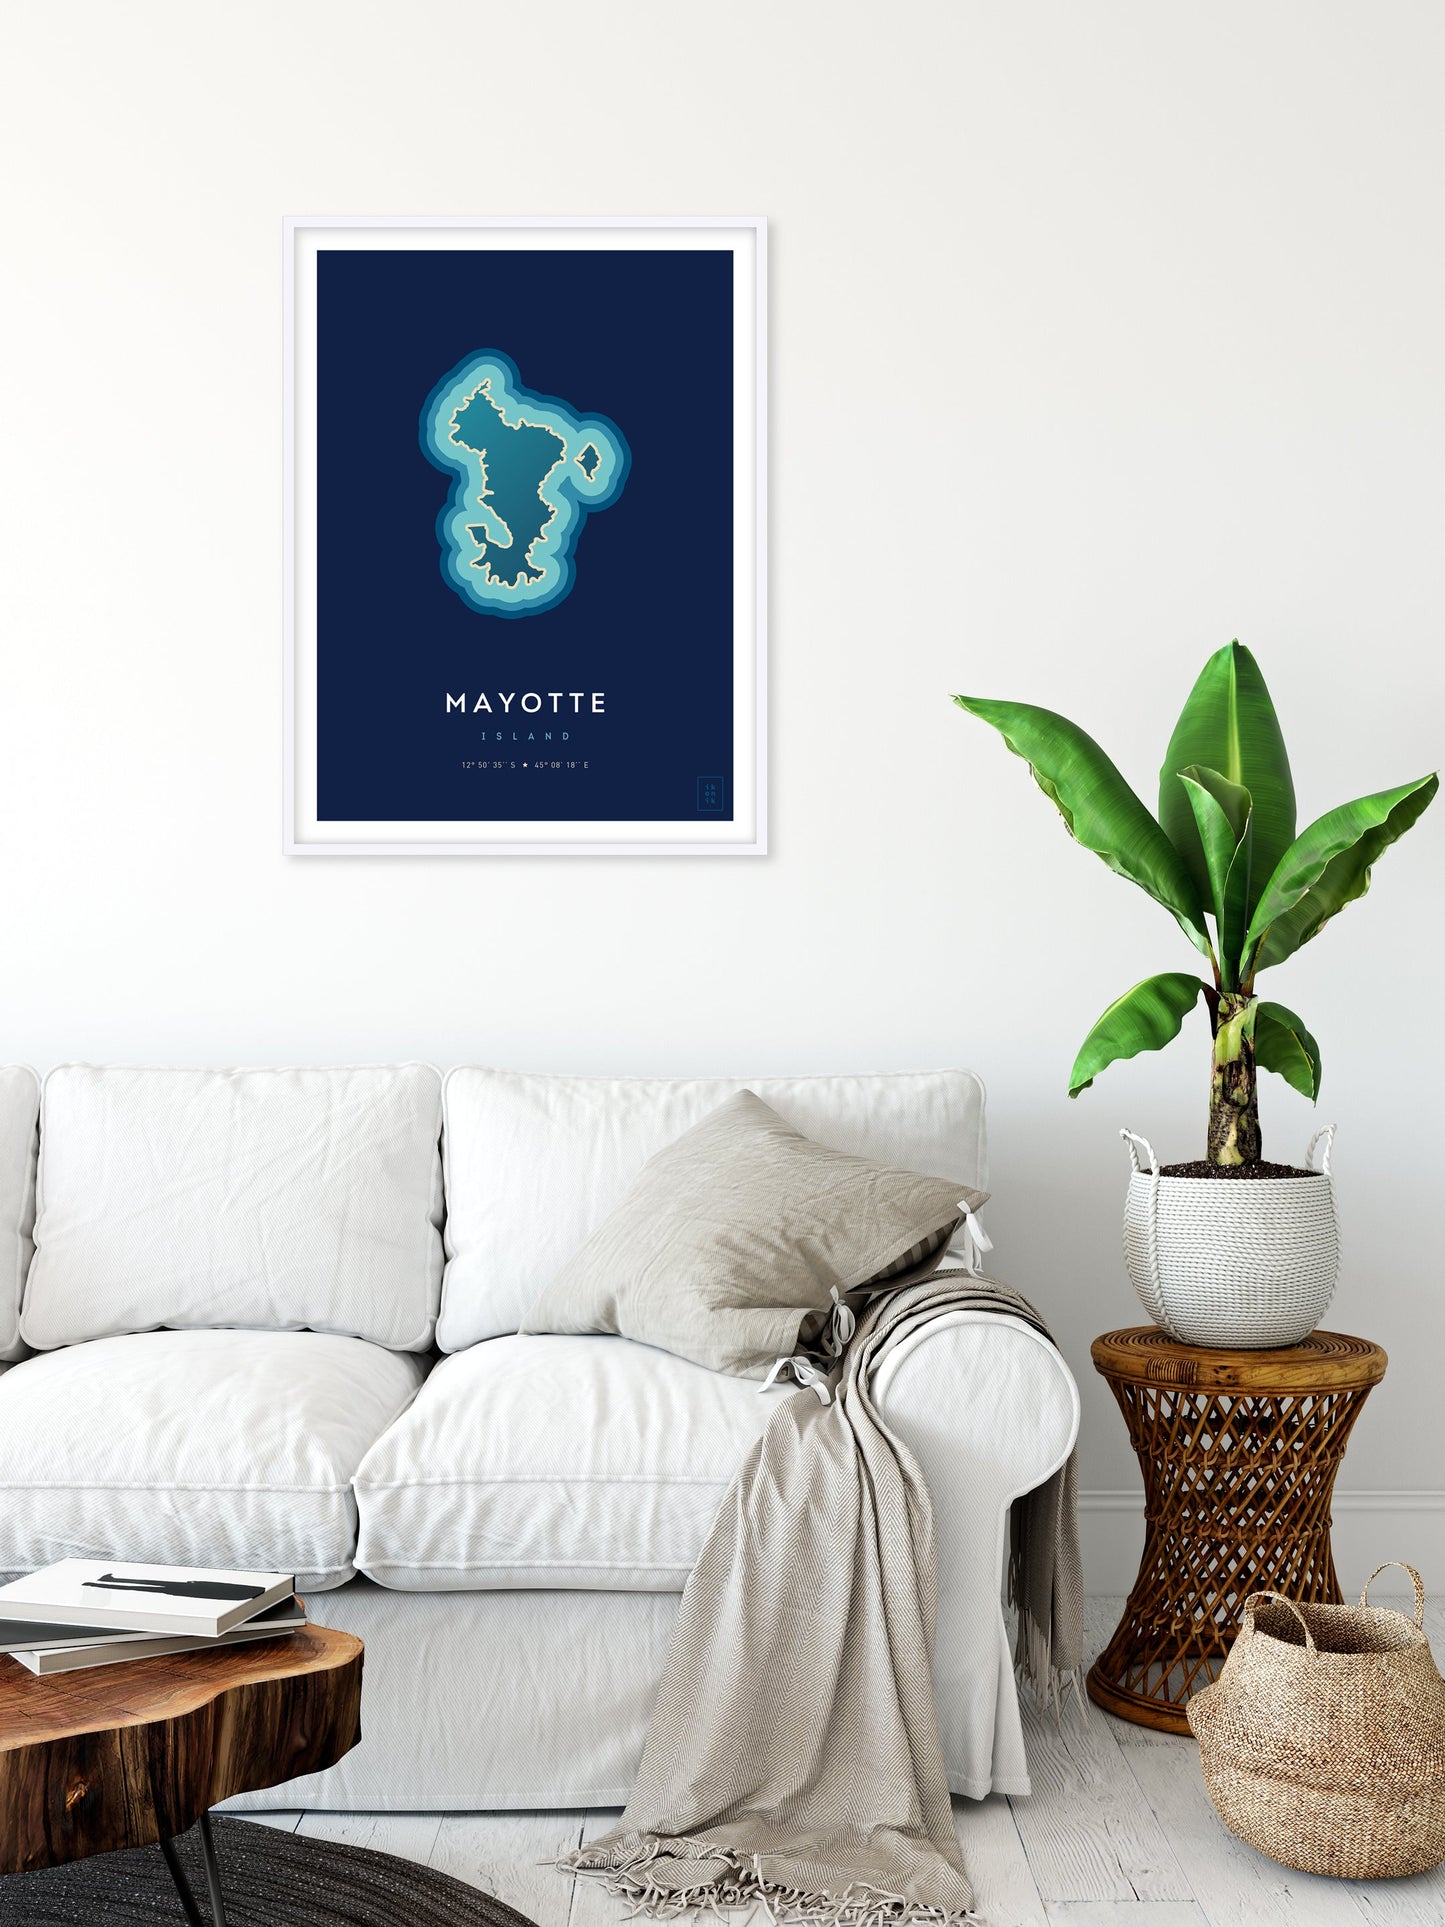 Mayotte island poster